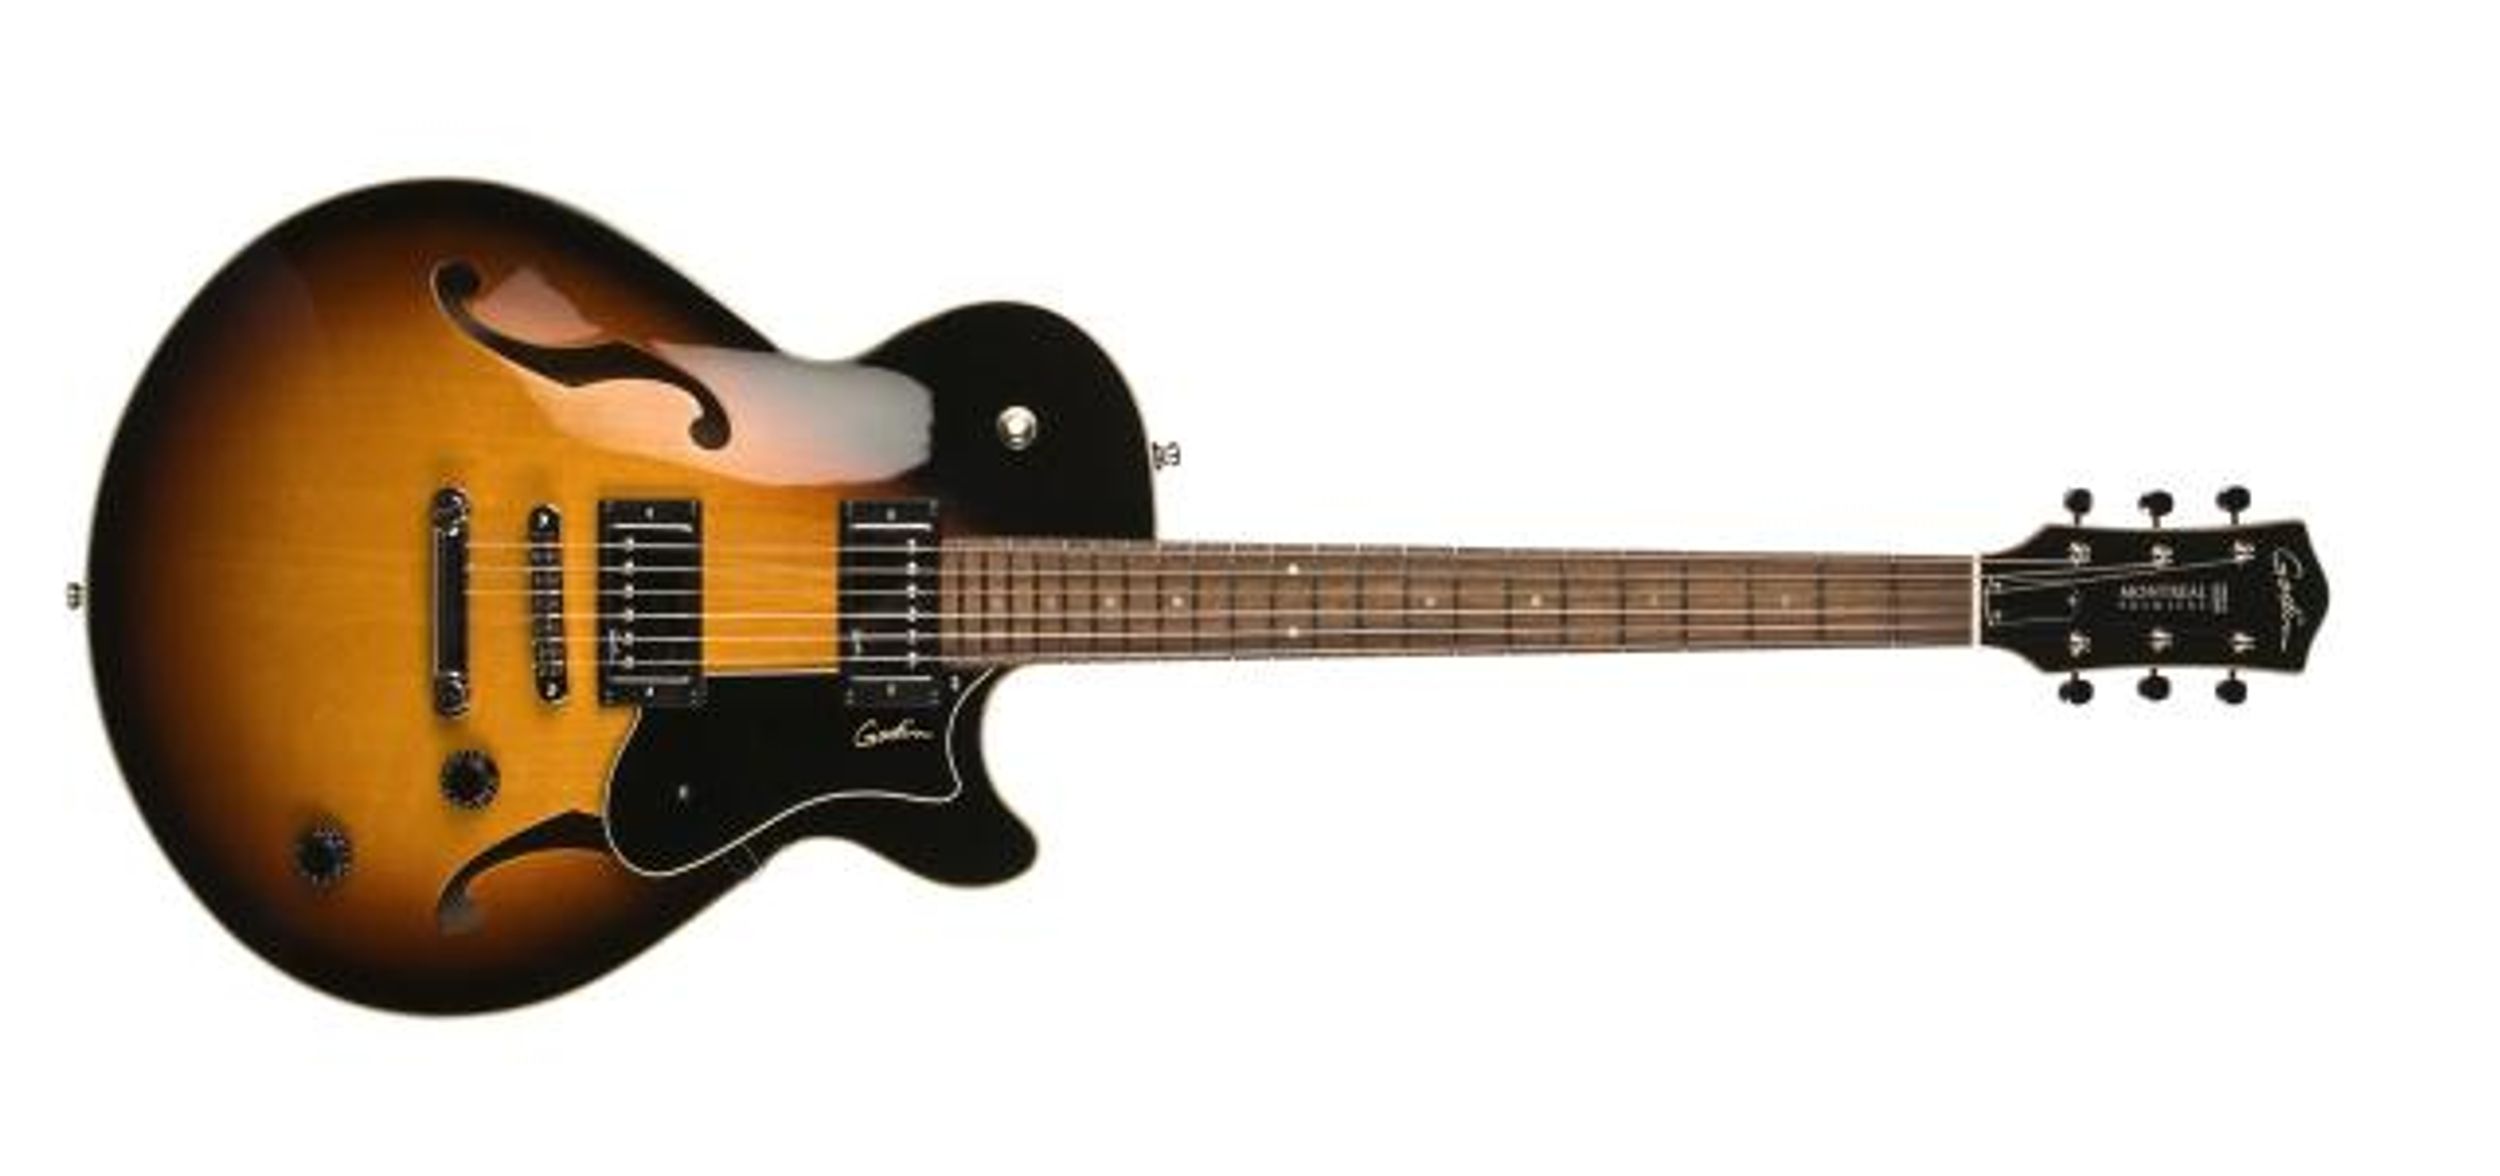 Godin Montreal Premiere Electric Guitar Review